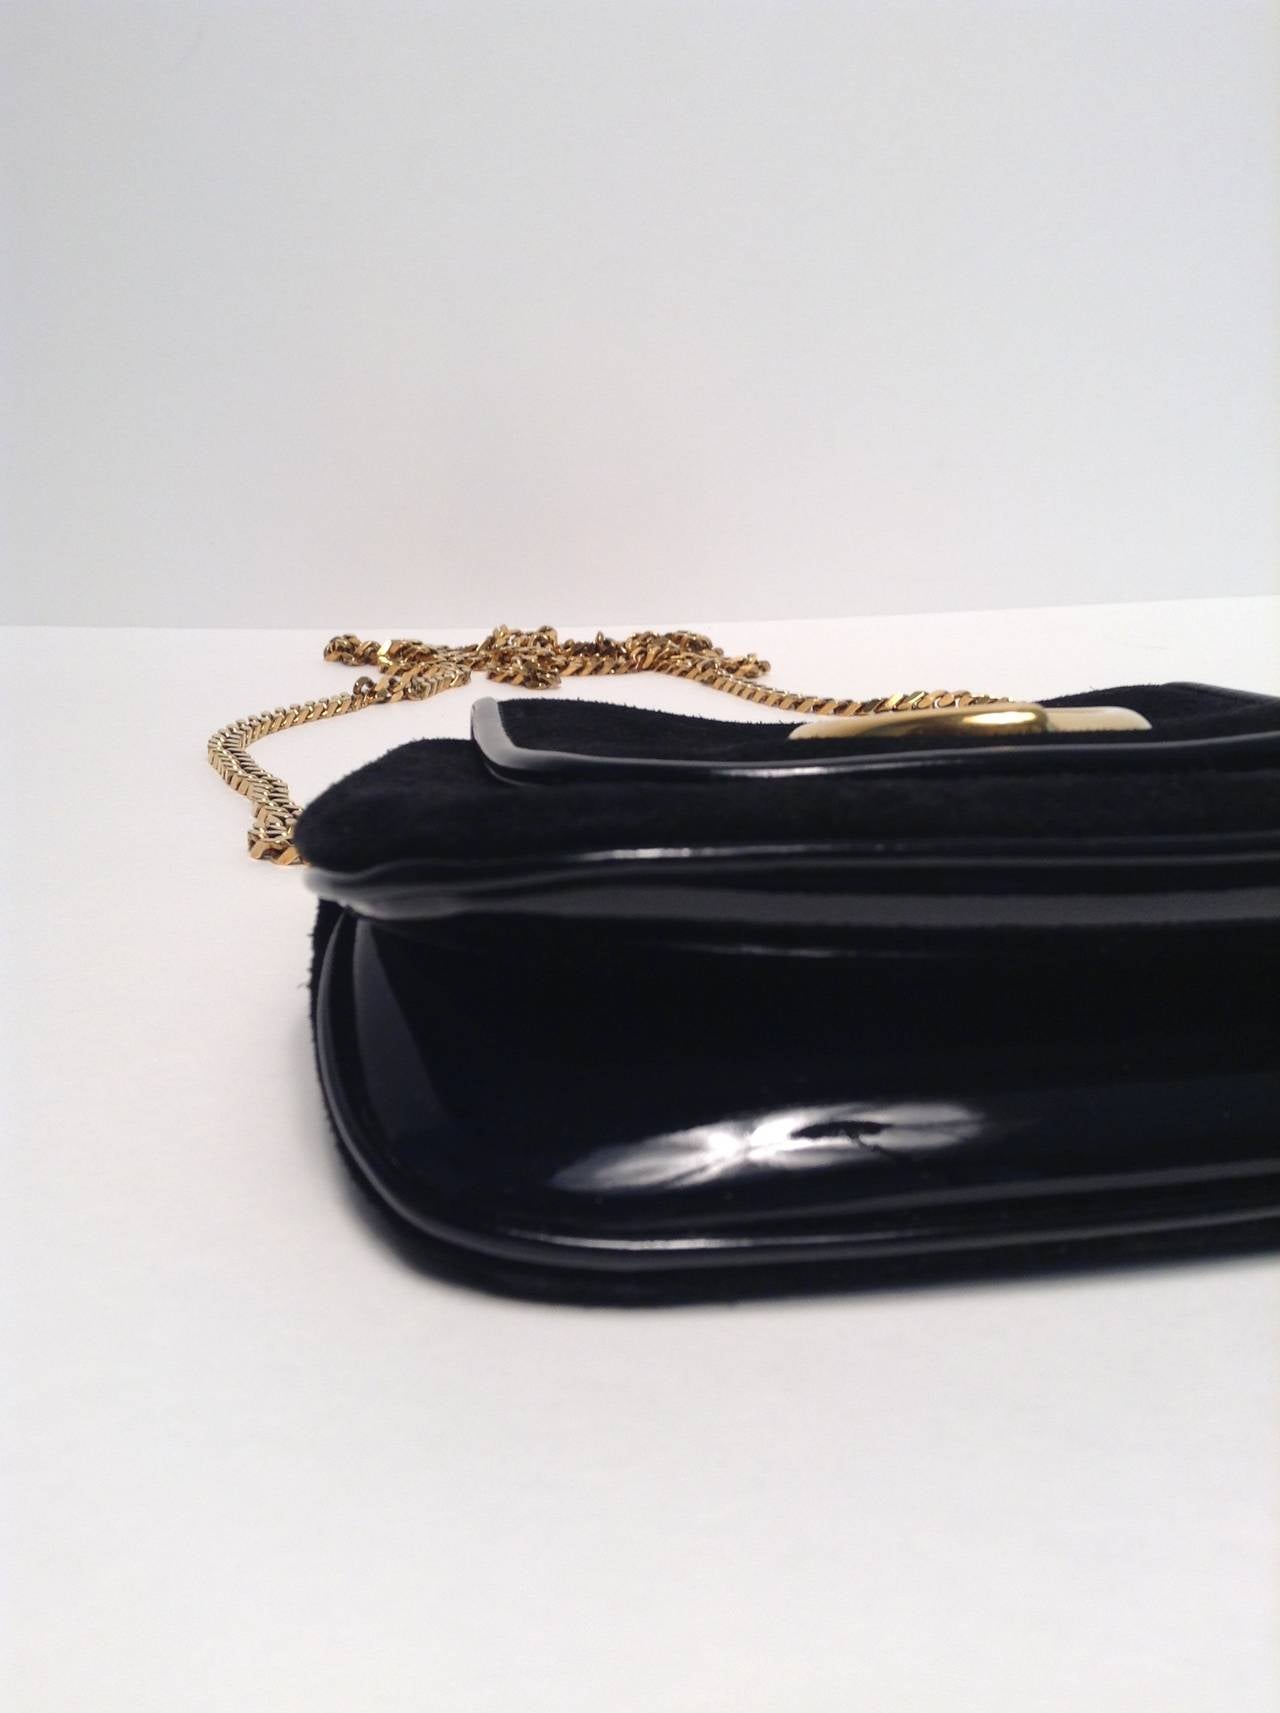 Finish off any evening ensemble with this classic Gucci Black Suede Gold Chain shoulder bag. The 1973 Reissue features black suede with a pop of black patent leather at the trim and bottom. Gold hardware and gold chain. Button flap closure. One wall